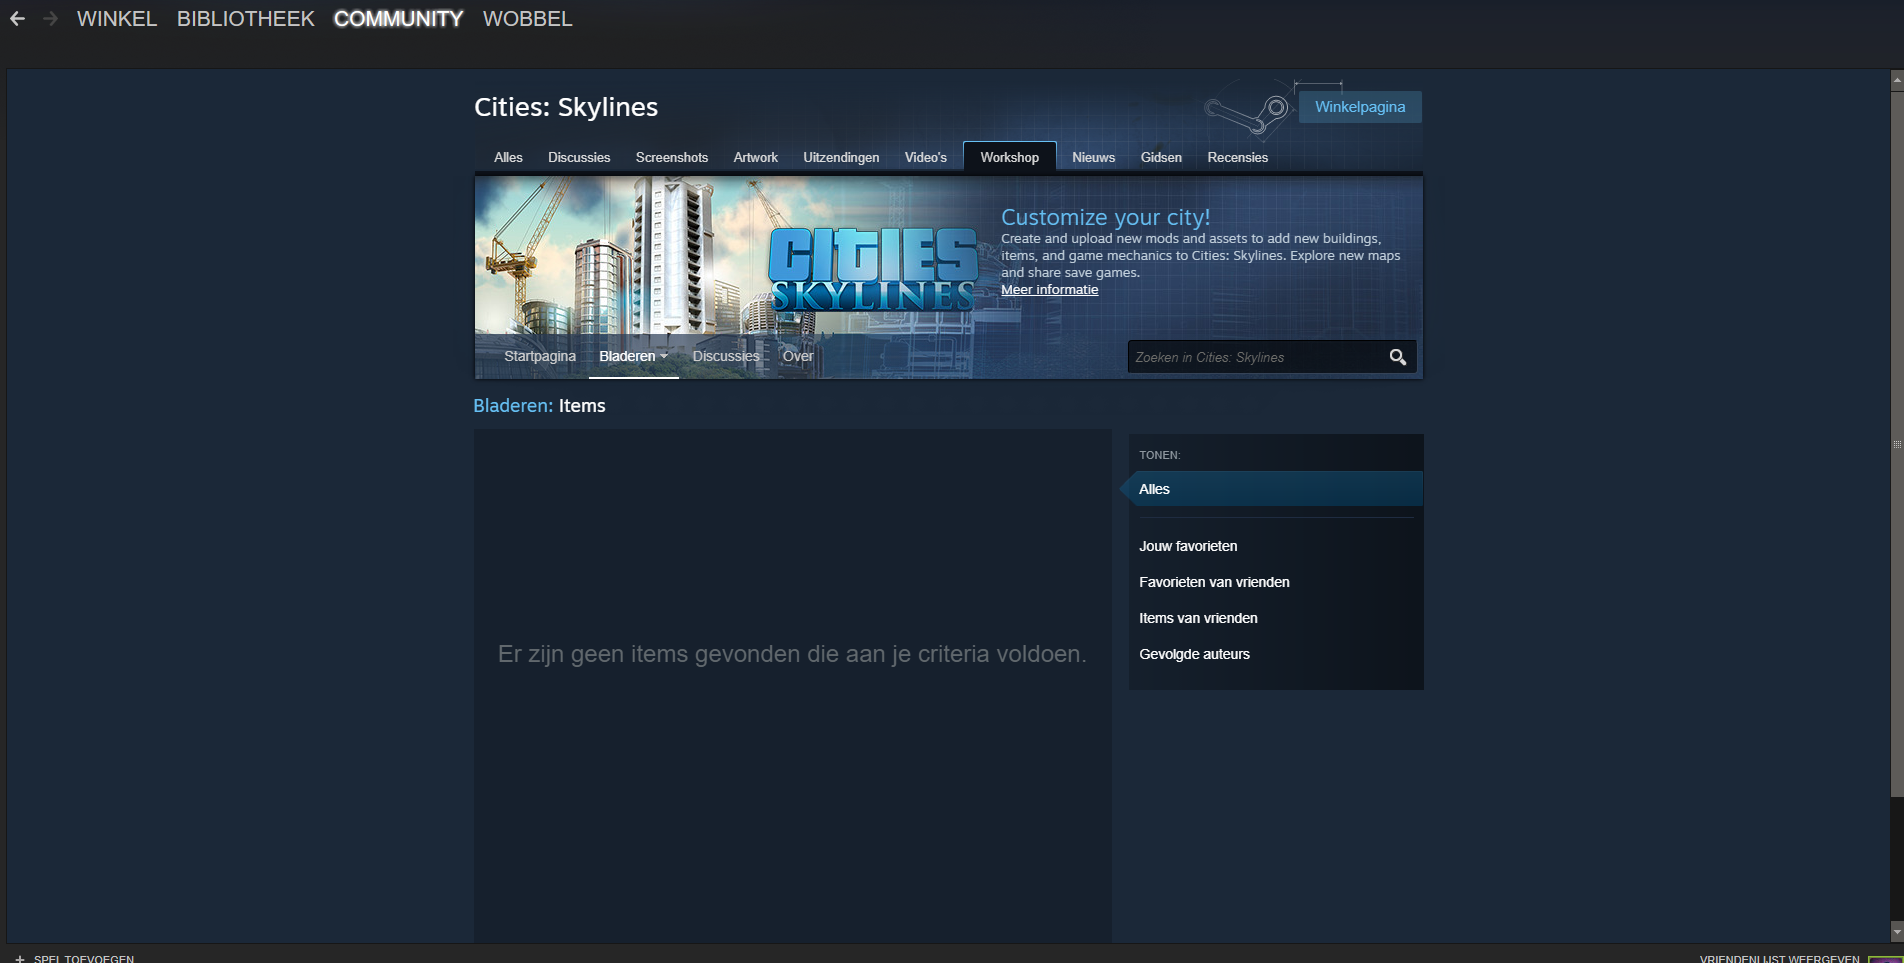 download from steam workshop without subscribing